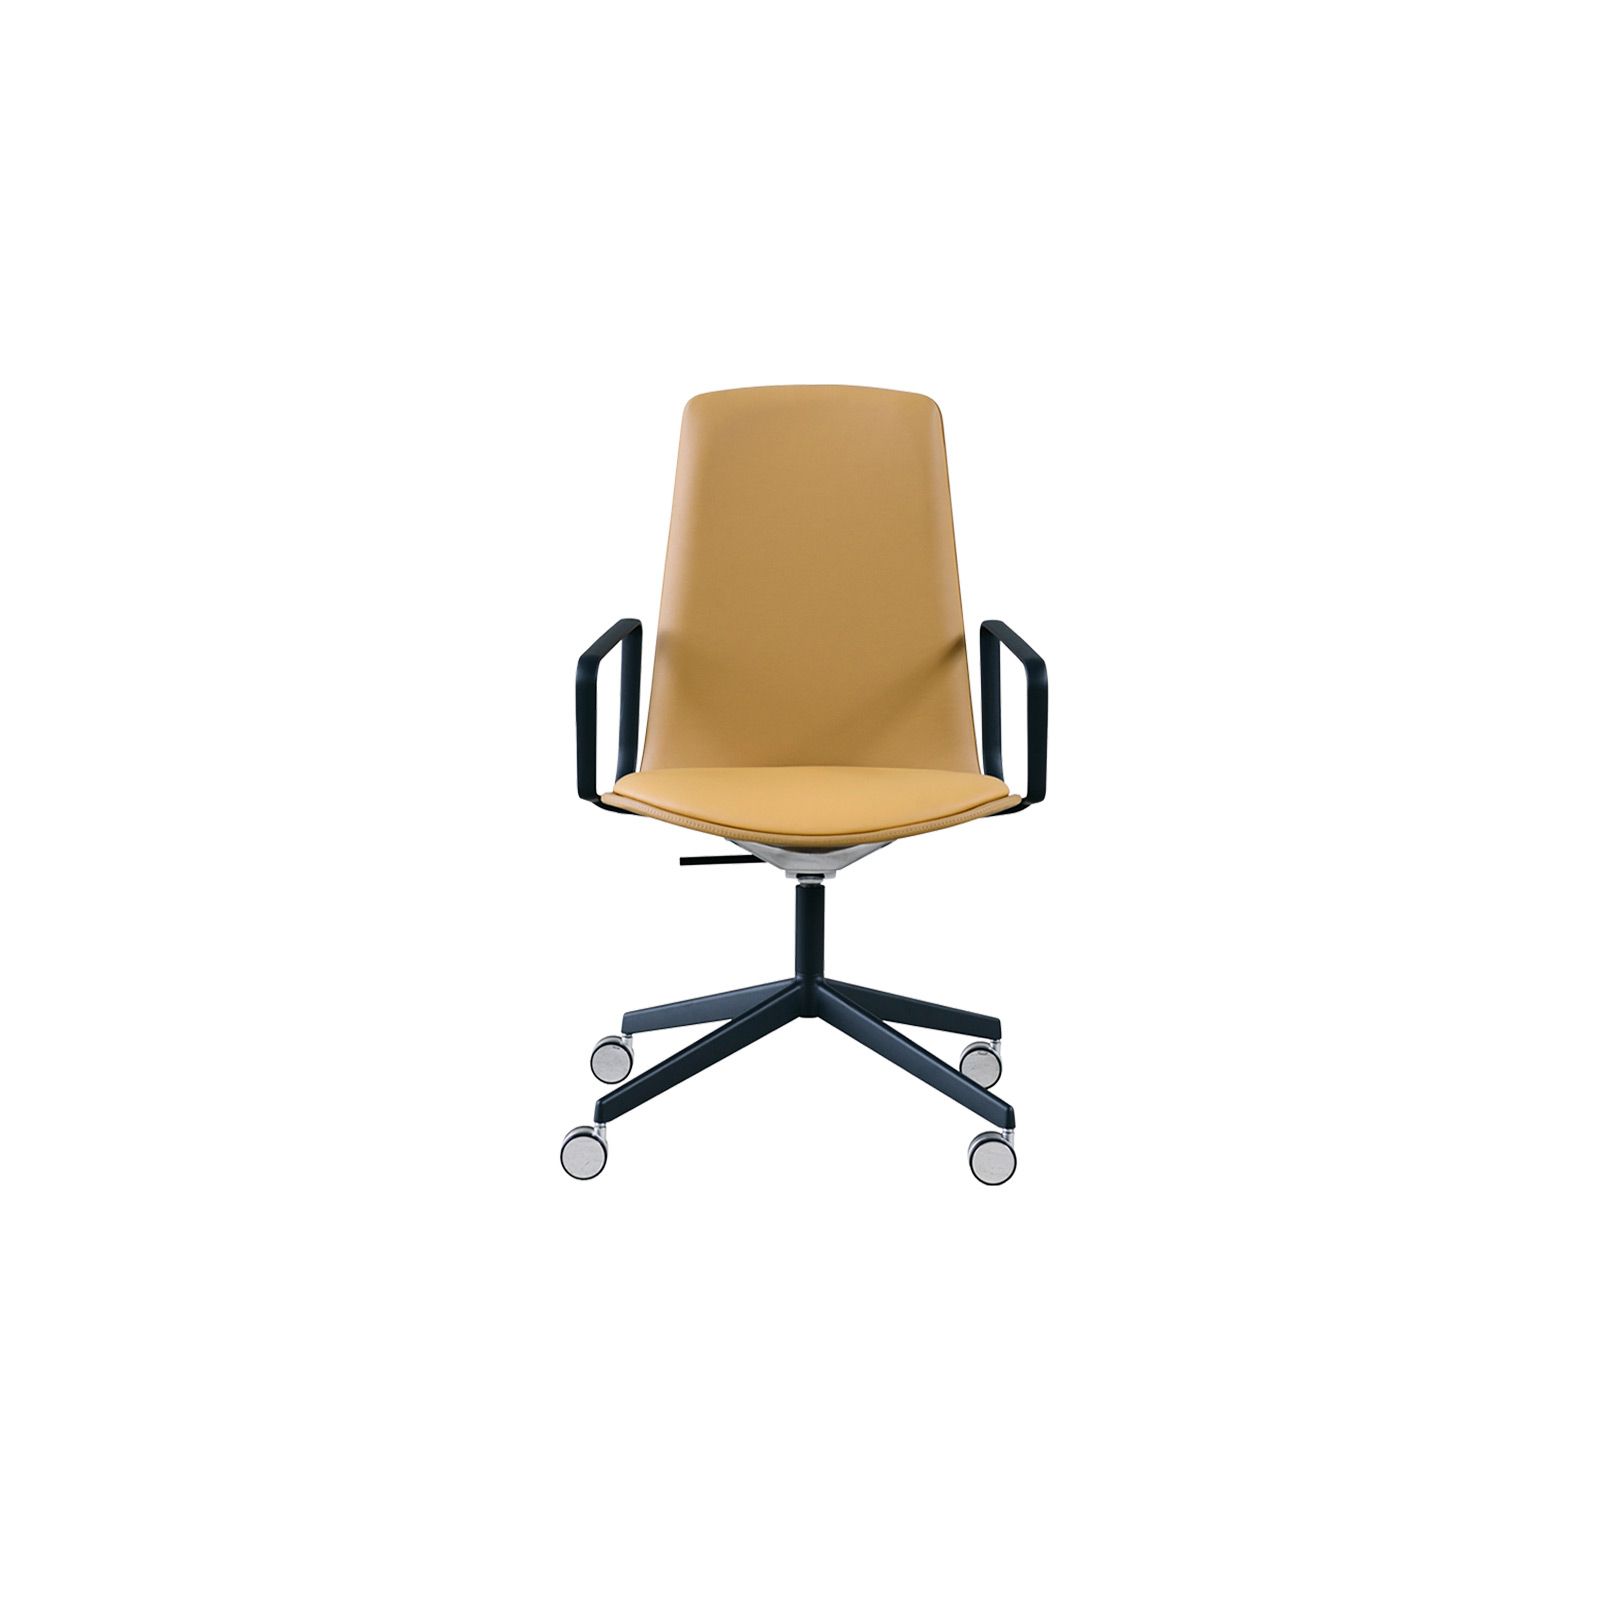 LOTTUS CONFERENCE CHAIR